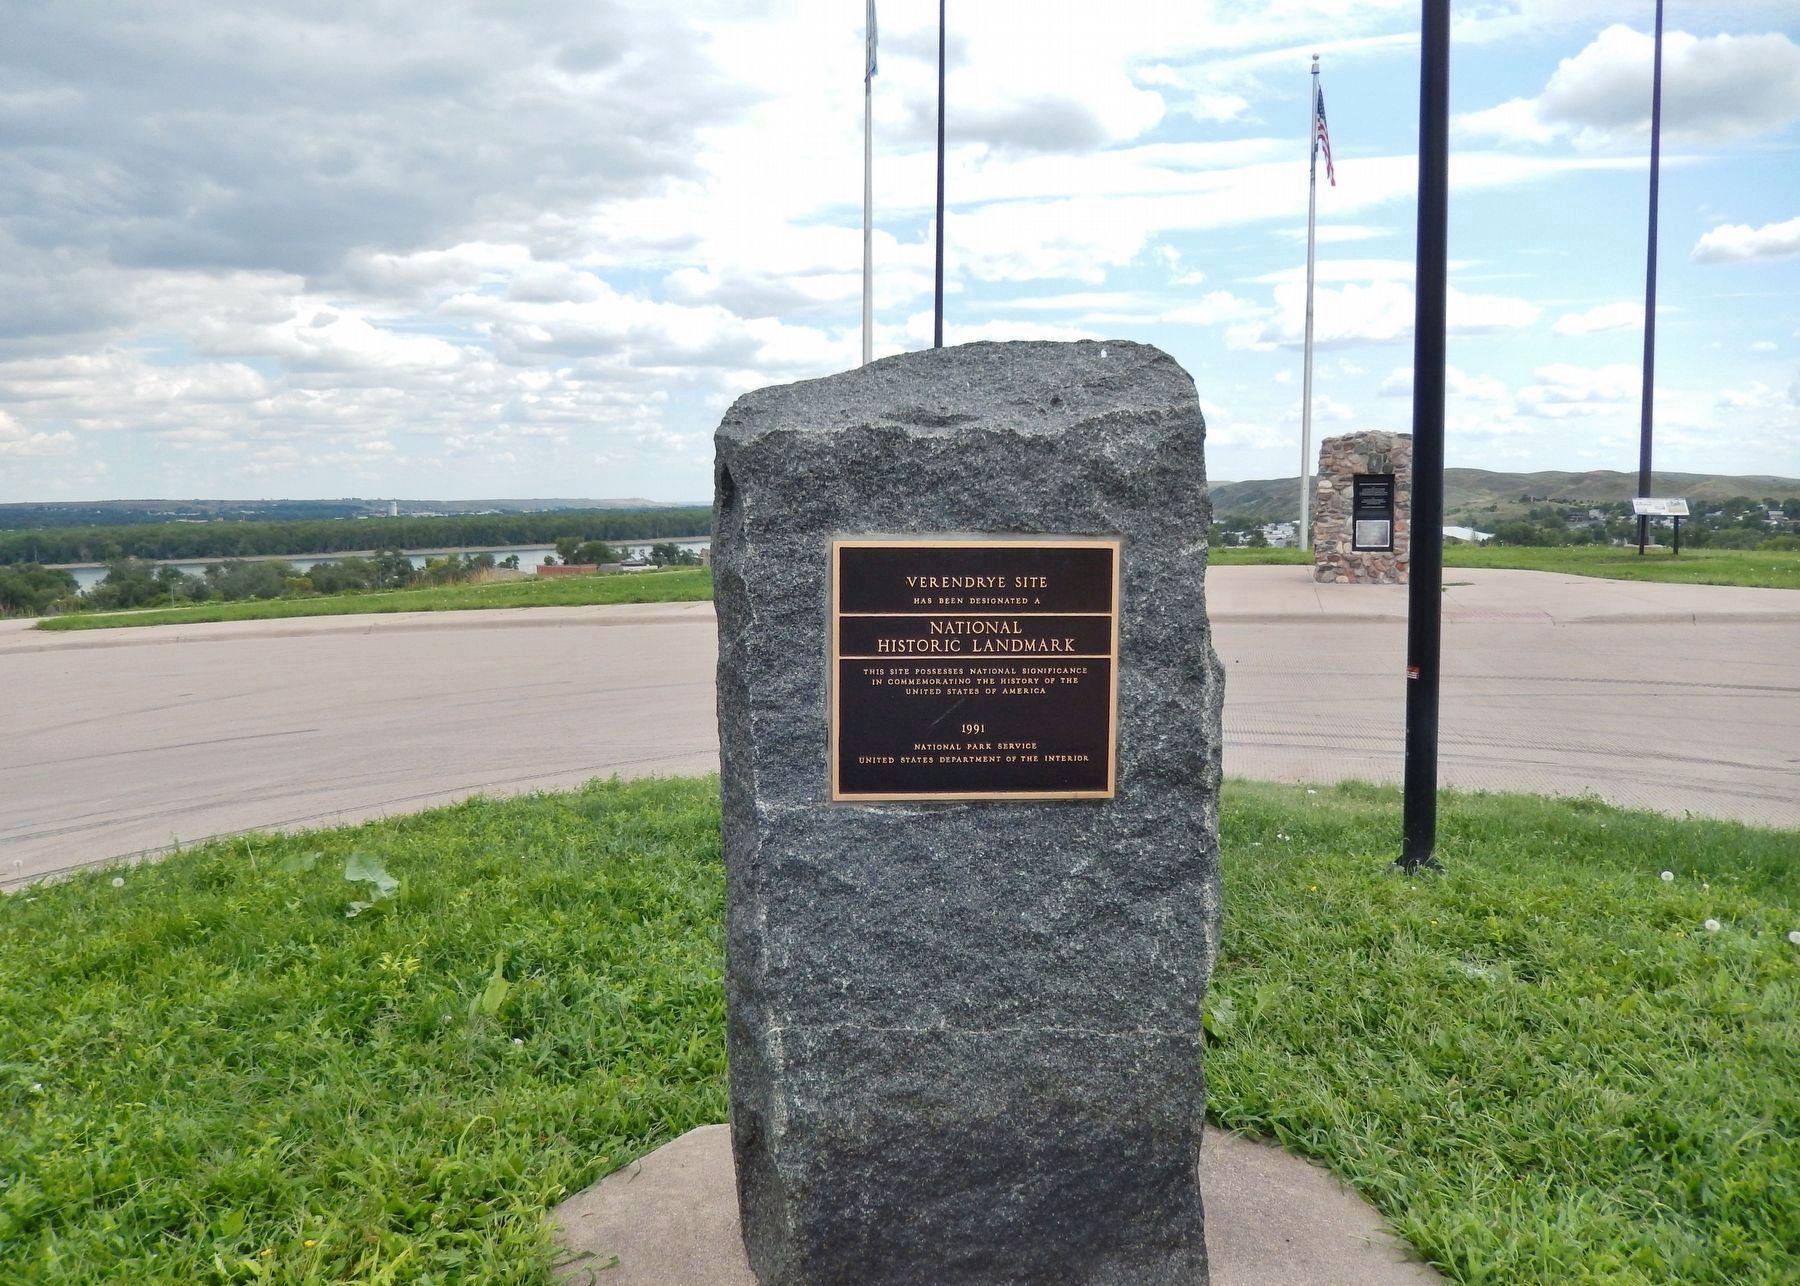 Verendrye Site Marker (<i>wide view; related markers, Missouri River & Pierre, SD in background</i>) image. Click for full size.